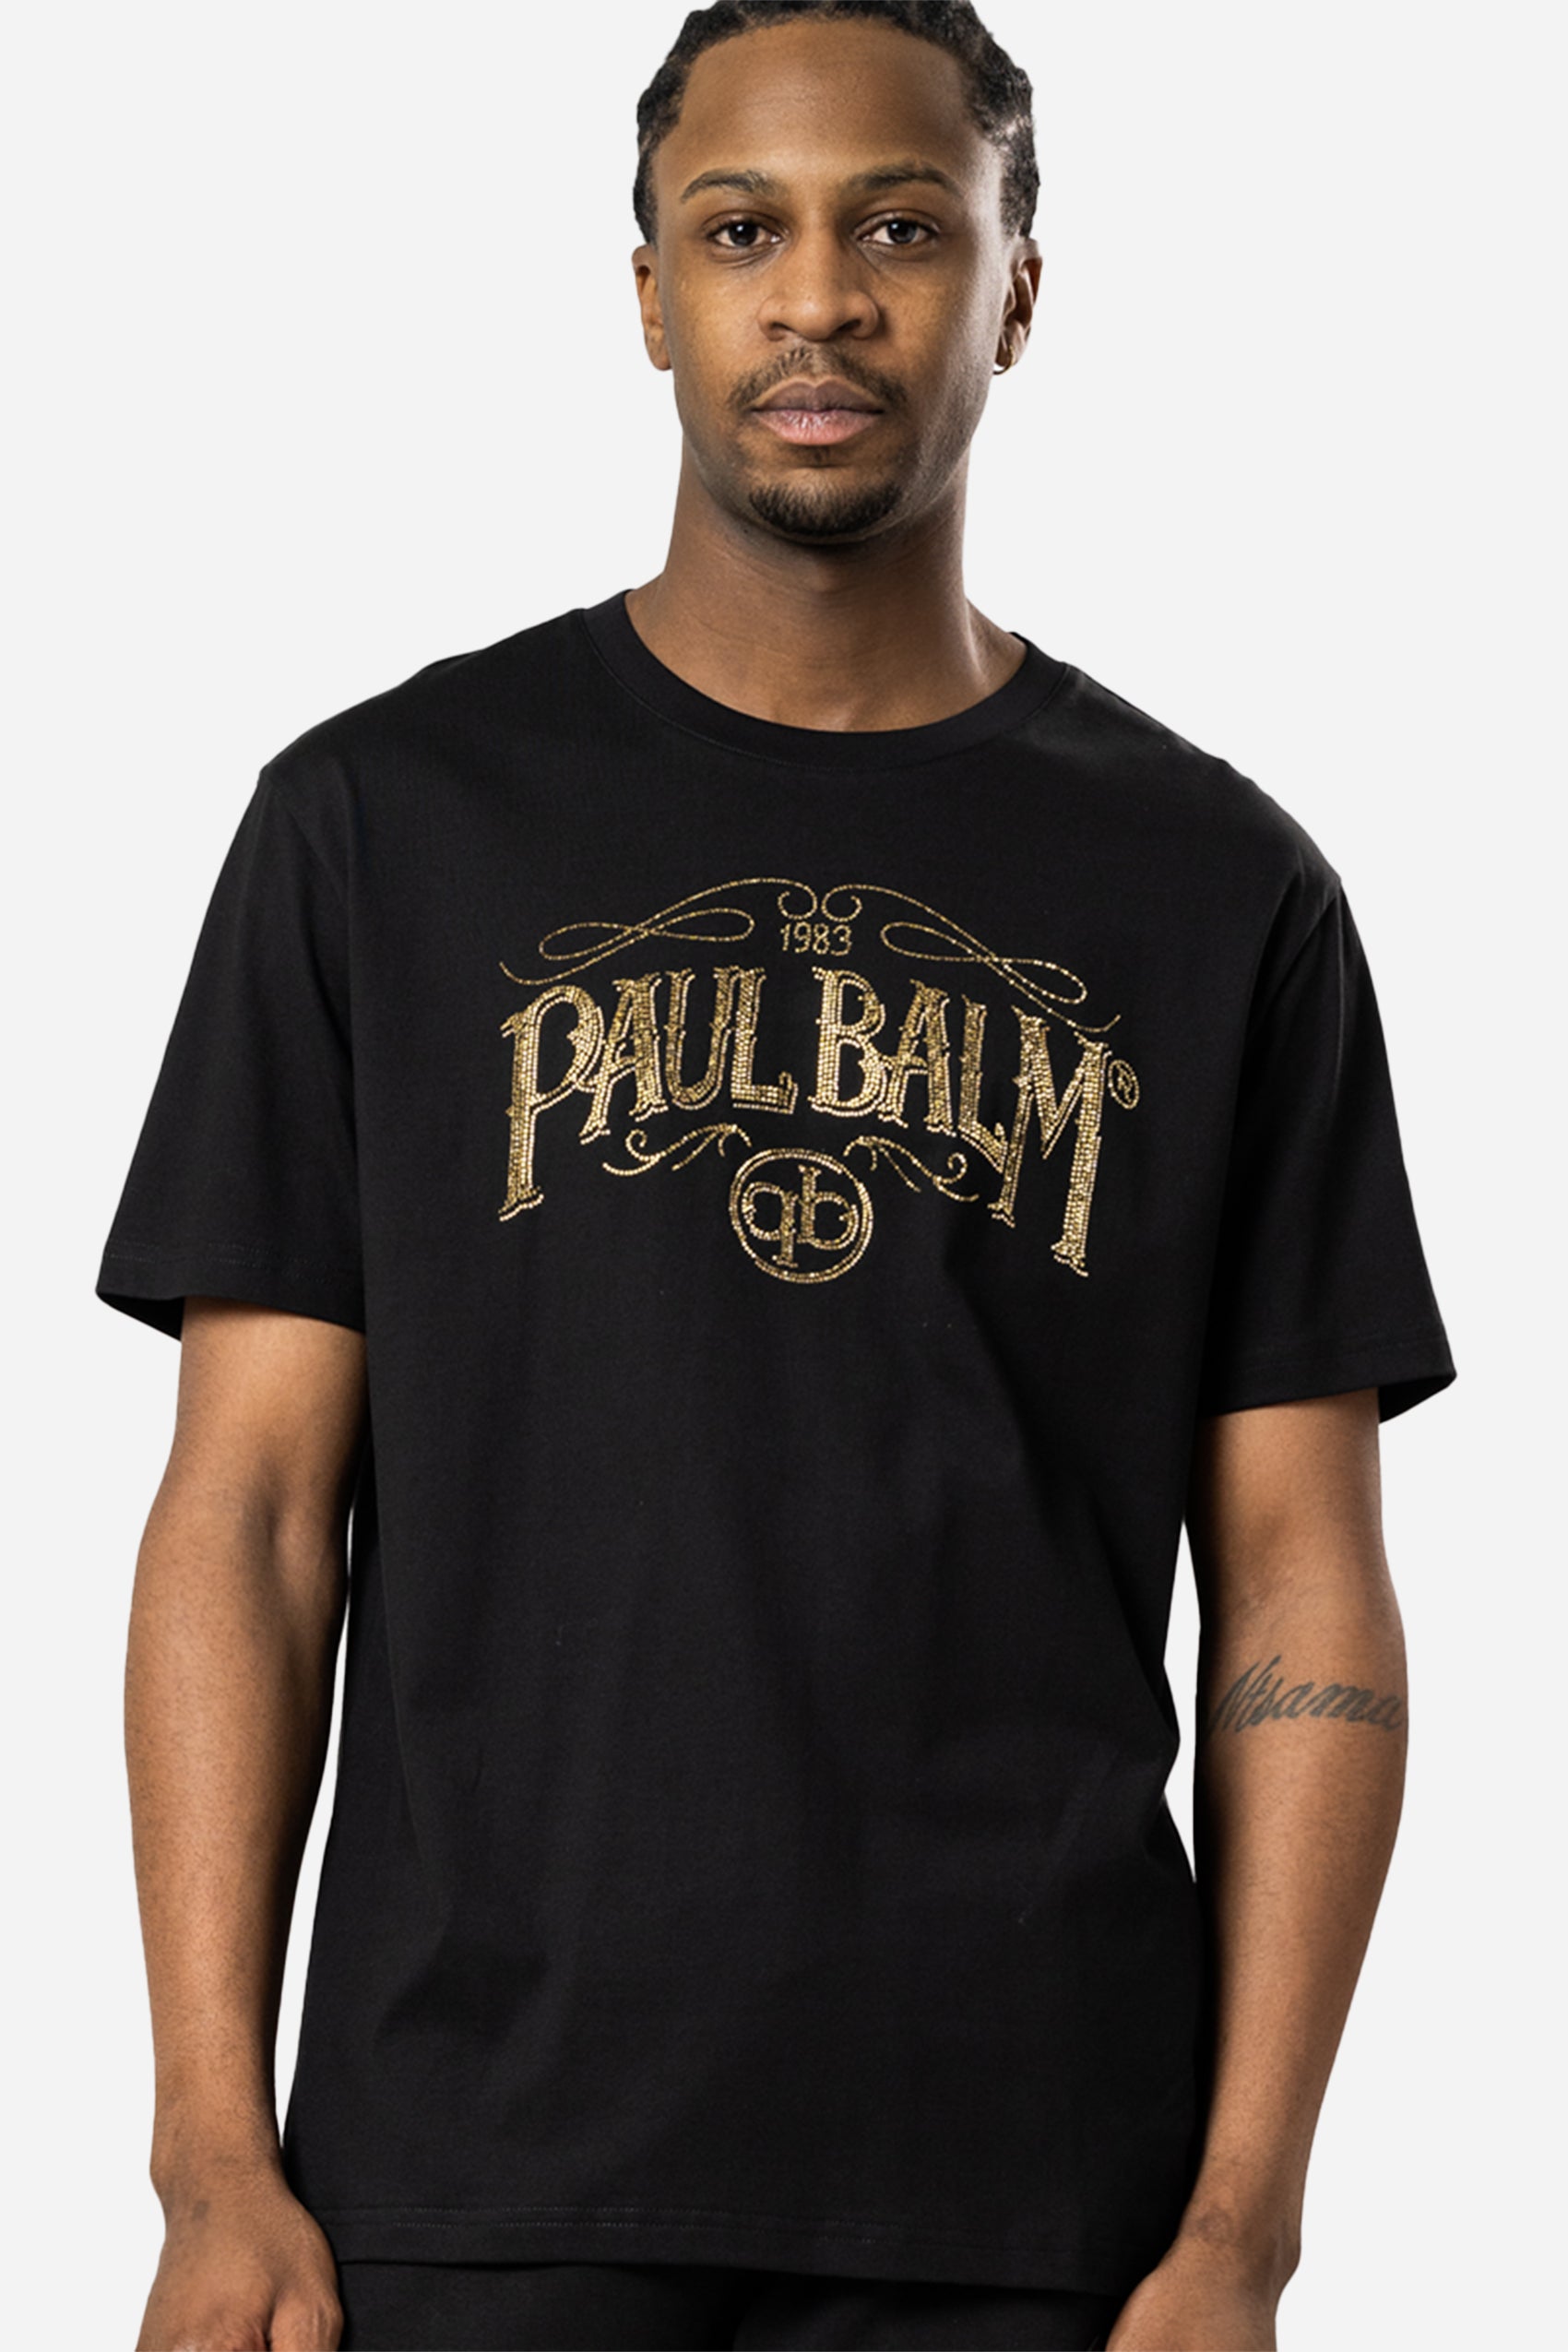 Celestic Crystals T-Shirt - Limited to 300 - PAUL BALM WORLD